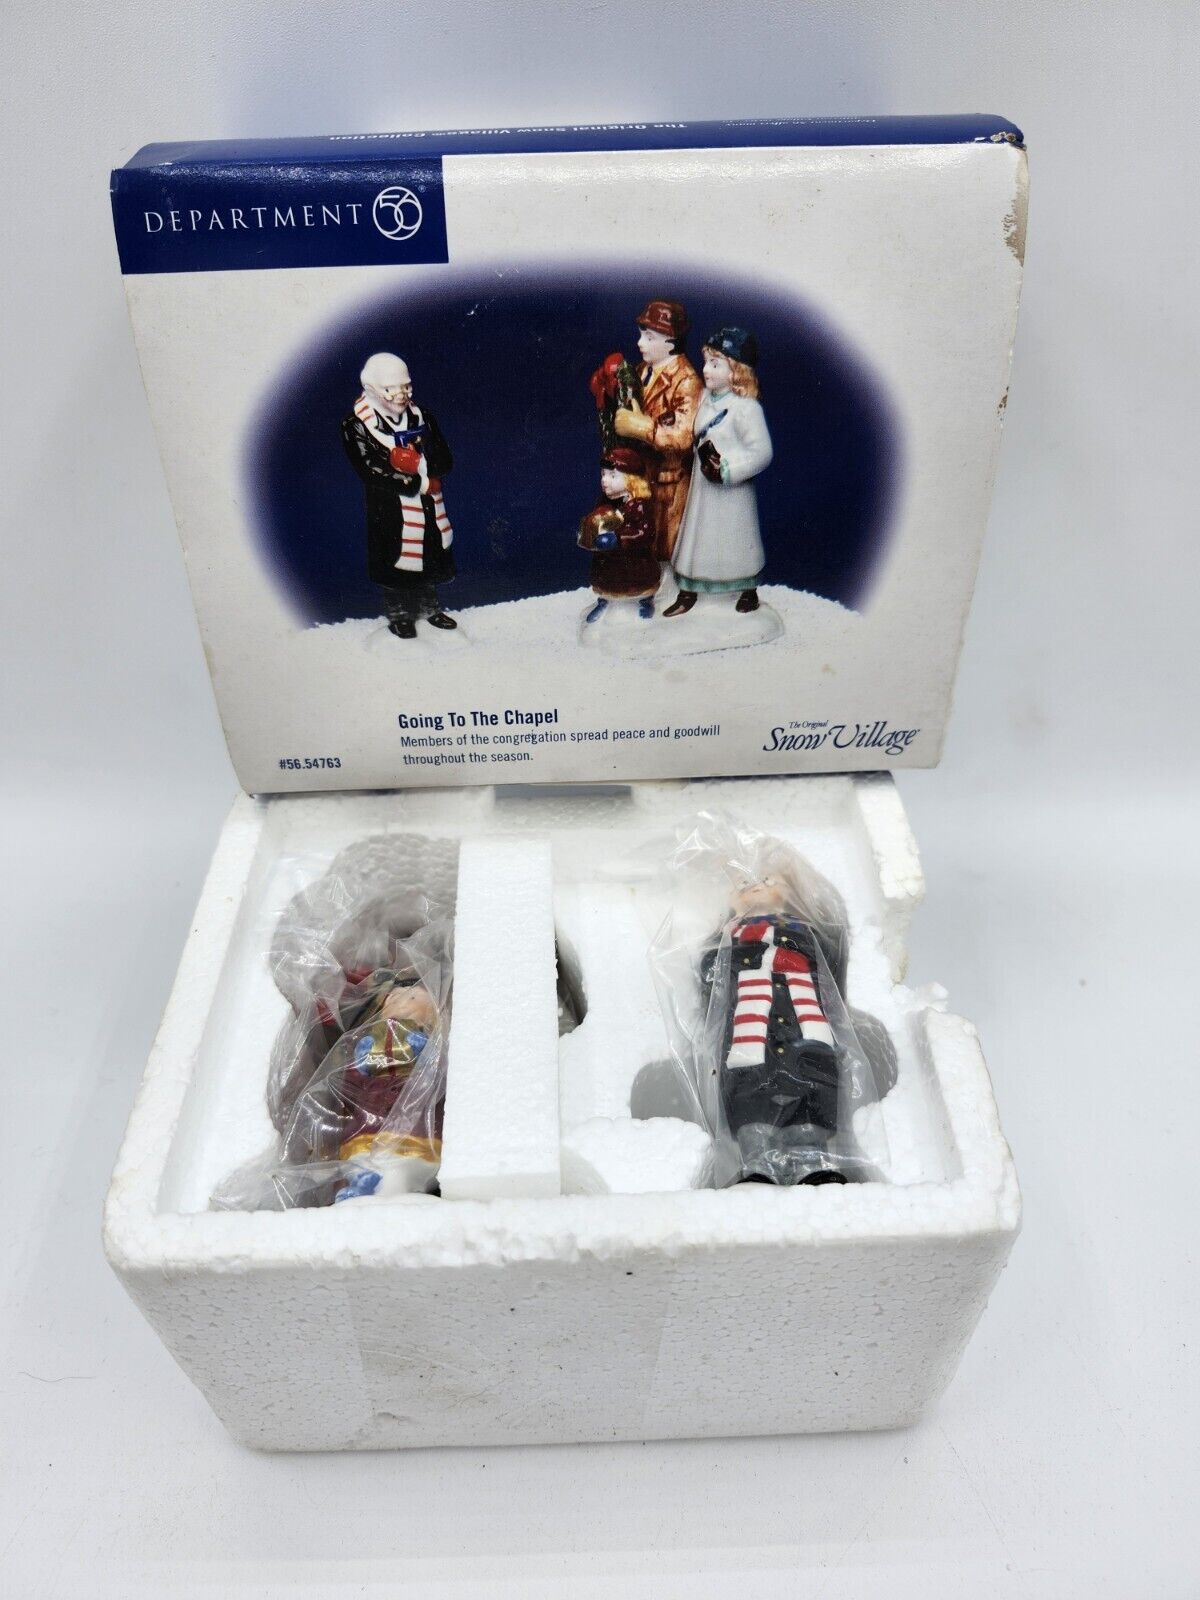 DEPT 56 SNOW VILLAGE GOING TO THE CHAPEL 5476-3 SET 2 In Box Figures